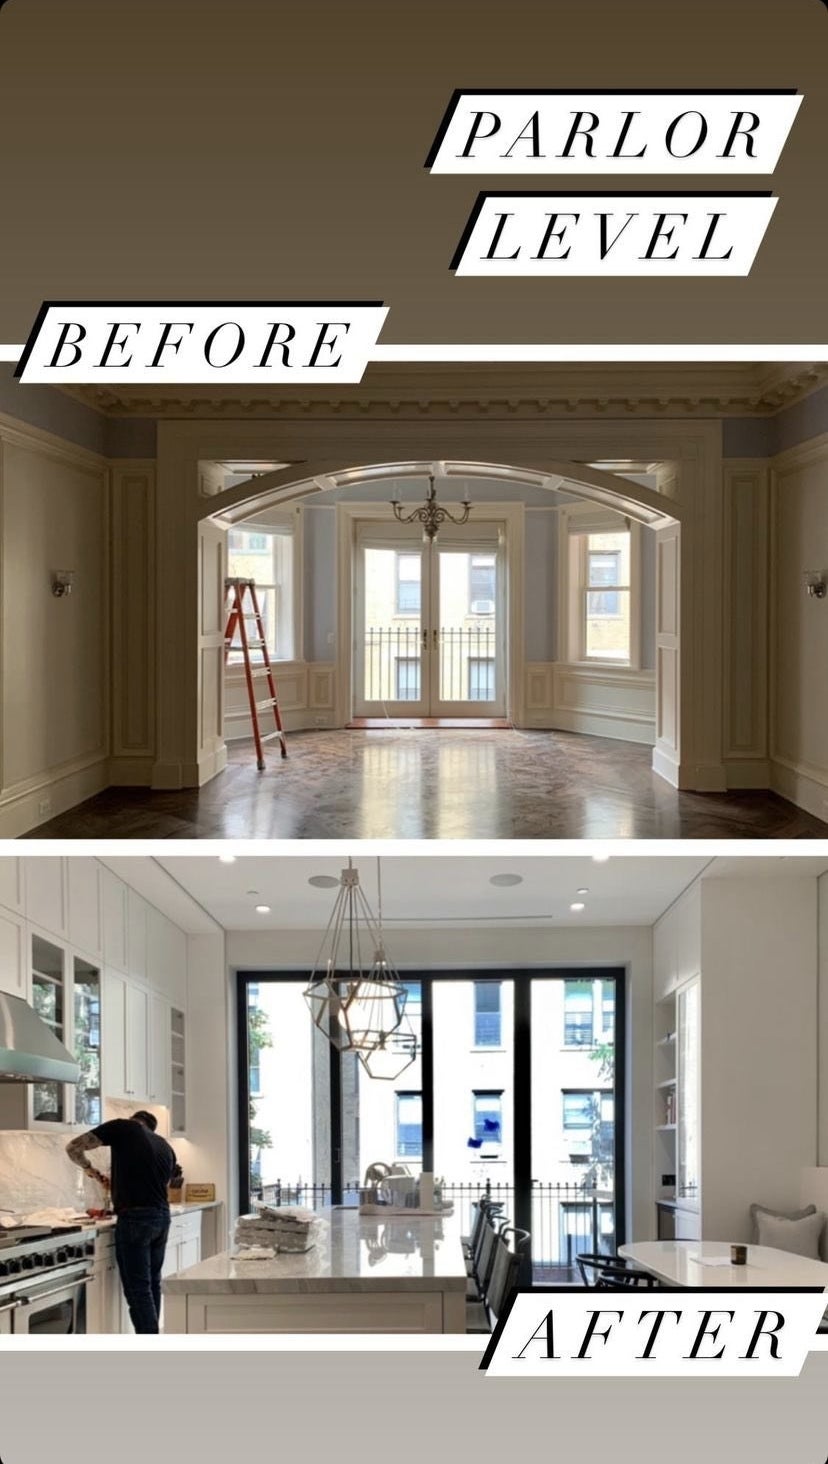 A &quot;before&quot; photo of an elegant room that has traditional architecture, such as an arch and pillars that&#x27;s completely transformed in an &quot;after&quot; photo where all the architecture is gone and simplified for a modern look